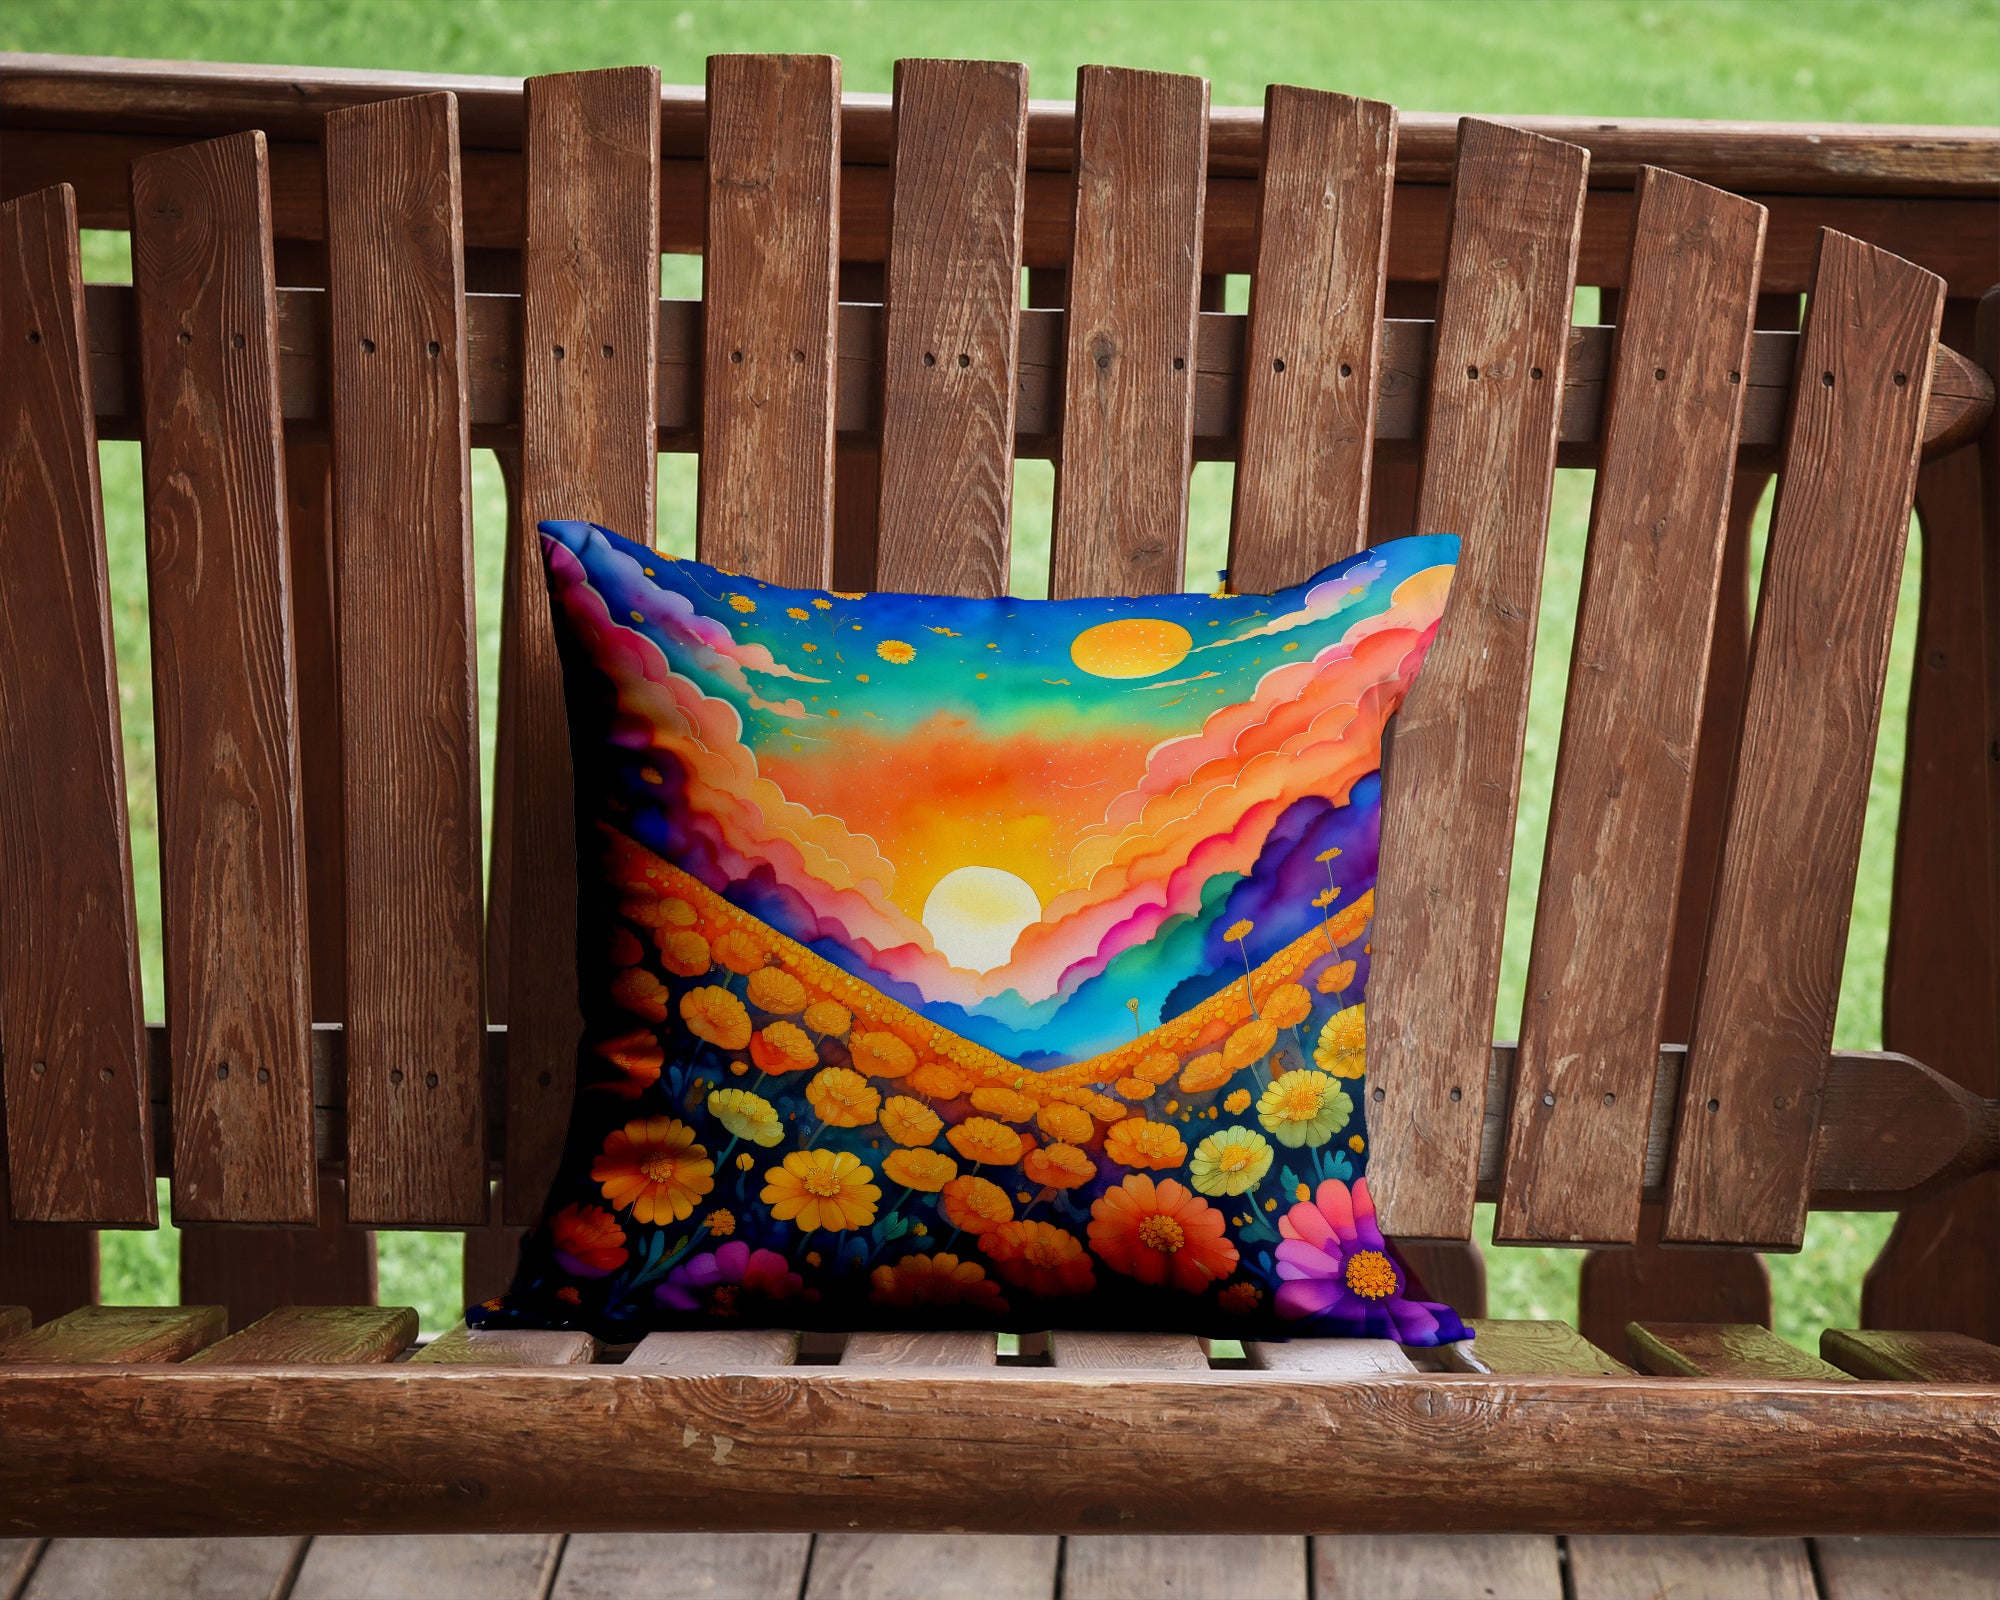 Buy this Colorful Marigolds Fabric Decorative Pillow